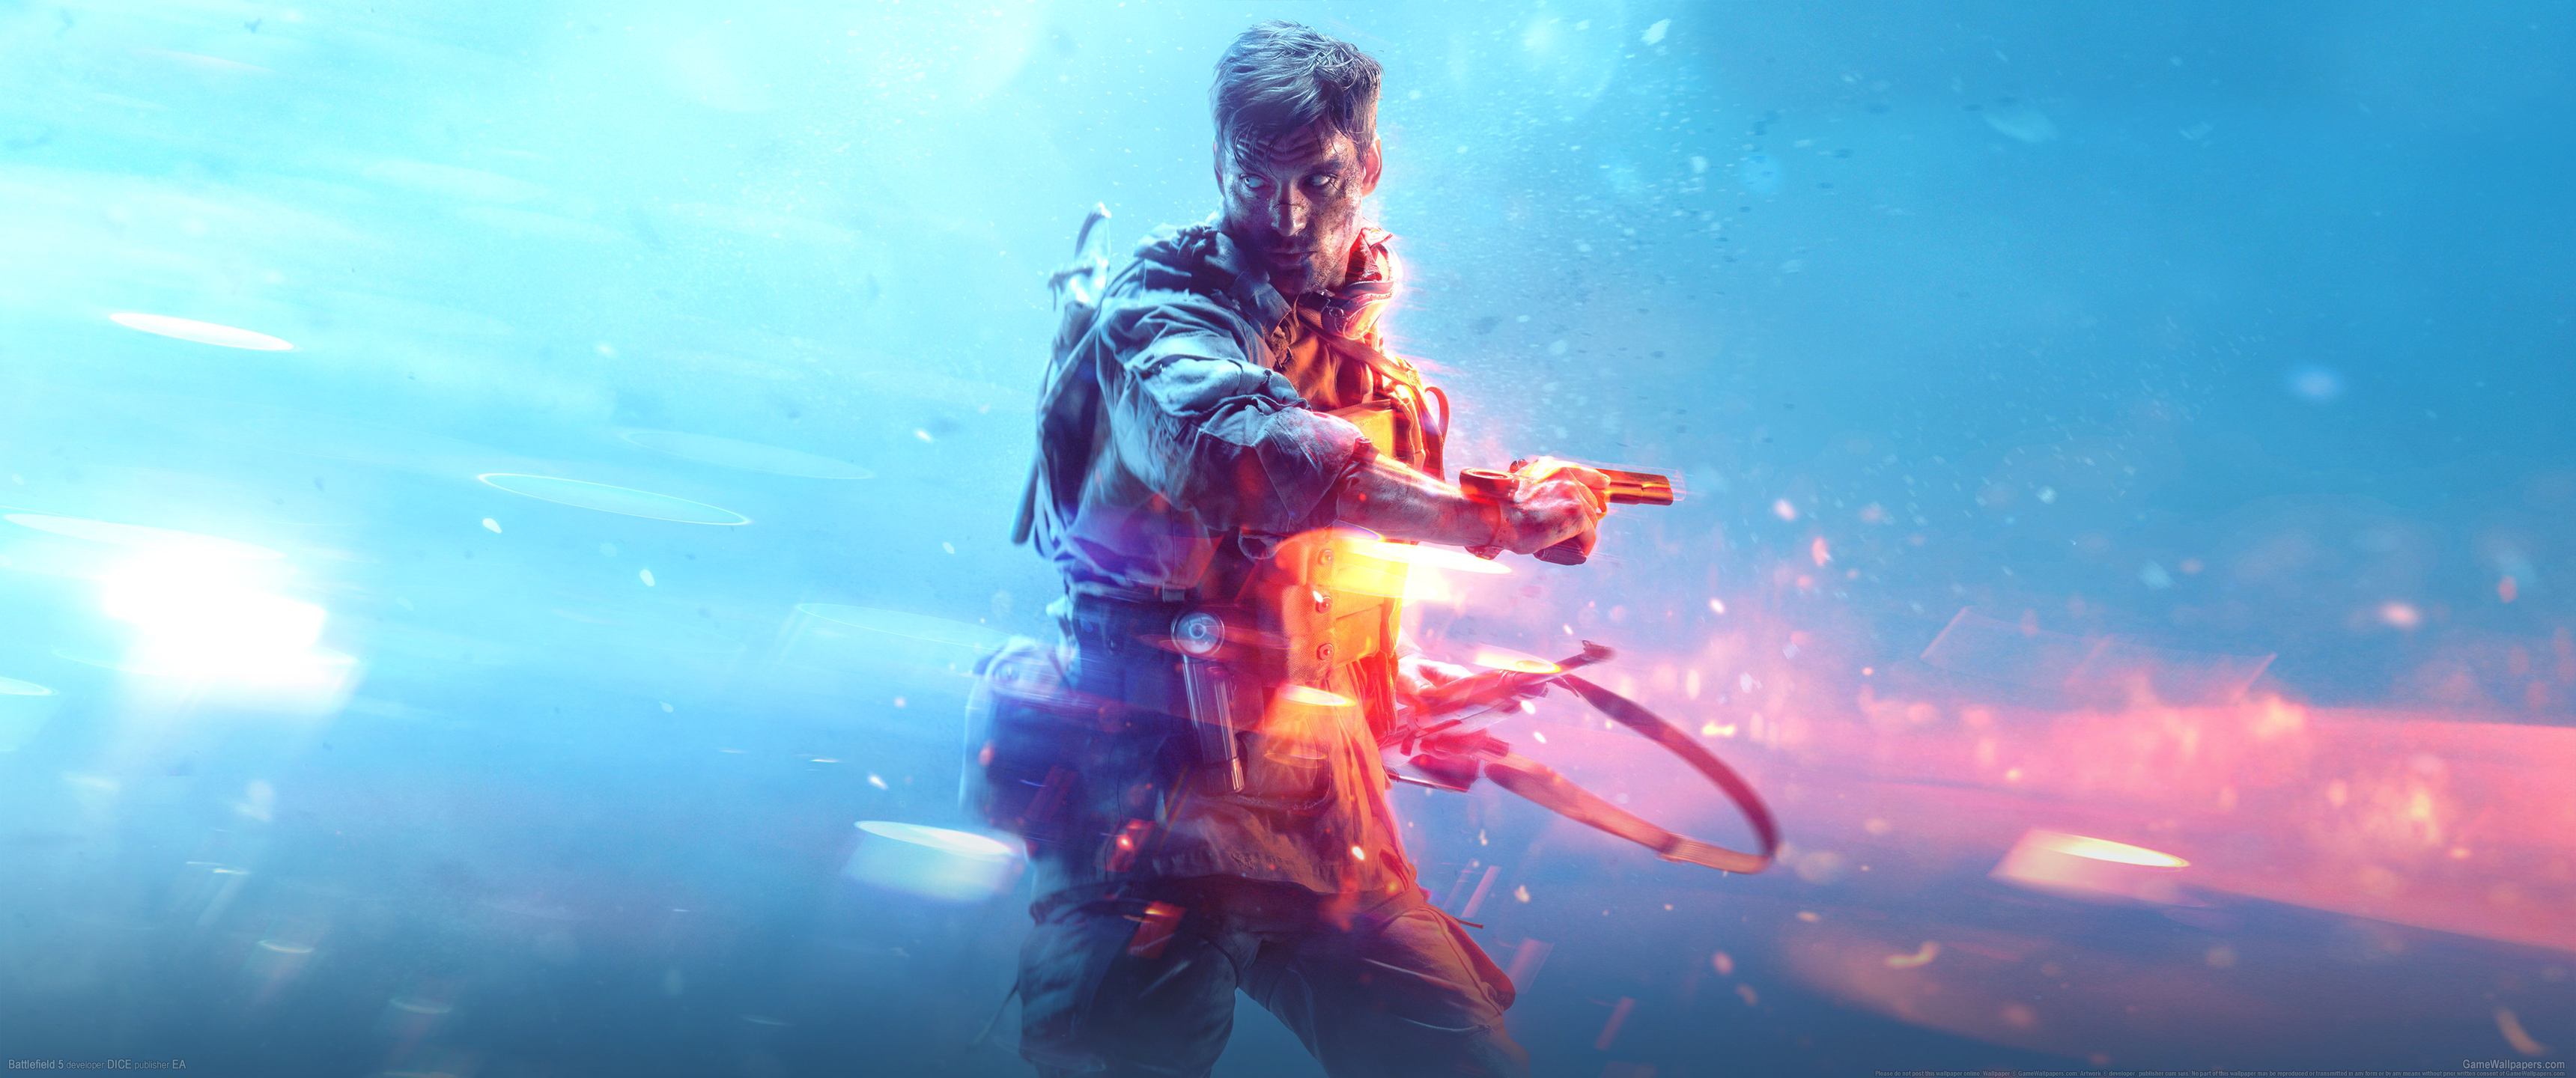 General 3440x1440 video games Battlefield V ultrawide Battlefield (game) cyan EA DICE Electronic Arts first-person shooter